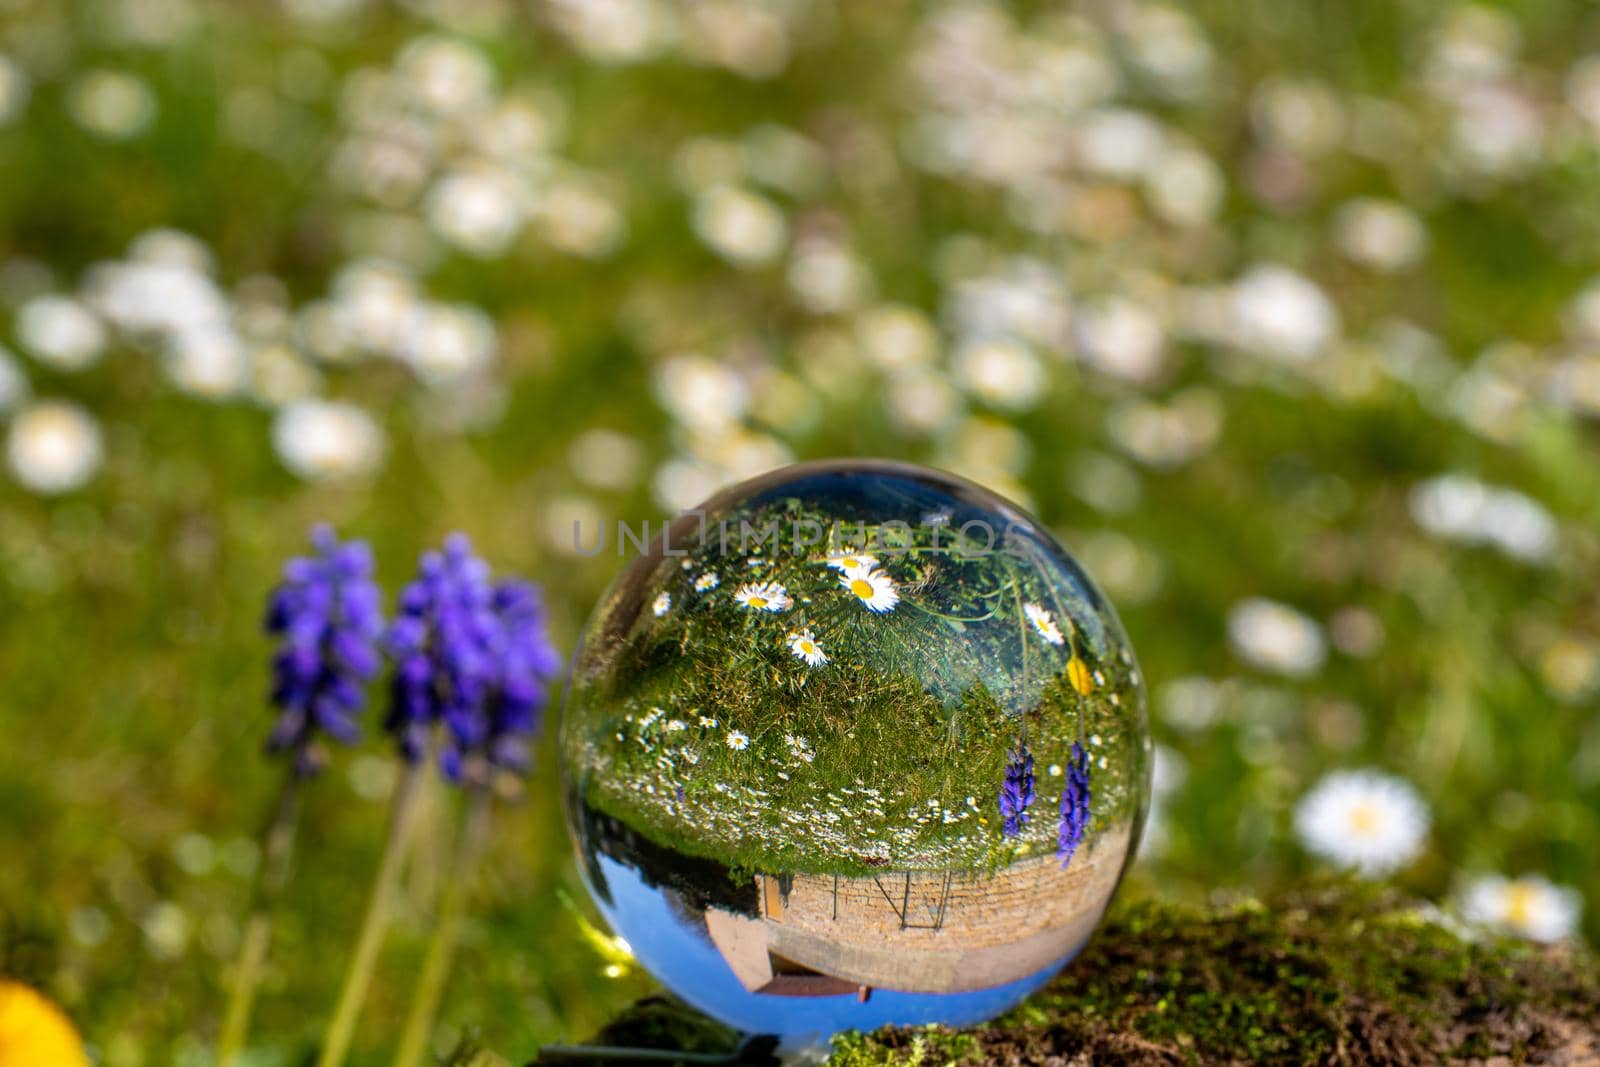 Crystal ball with grape hyacinth, dandelion flower and daisy on moss covered stone  by reinerc